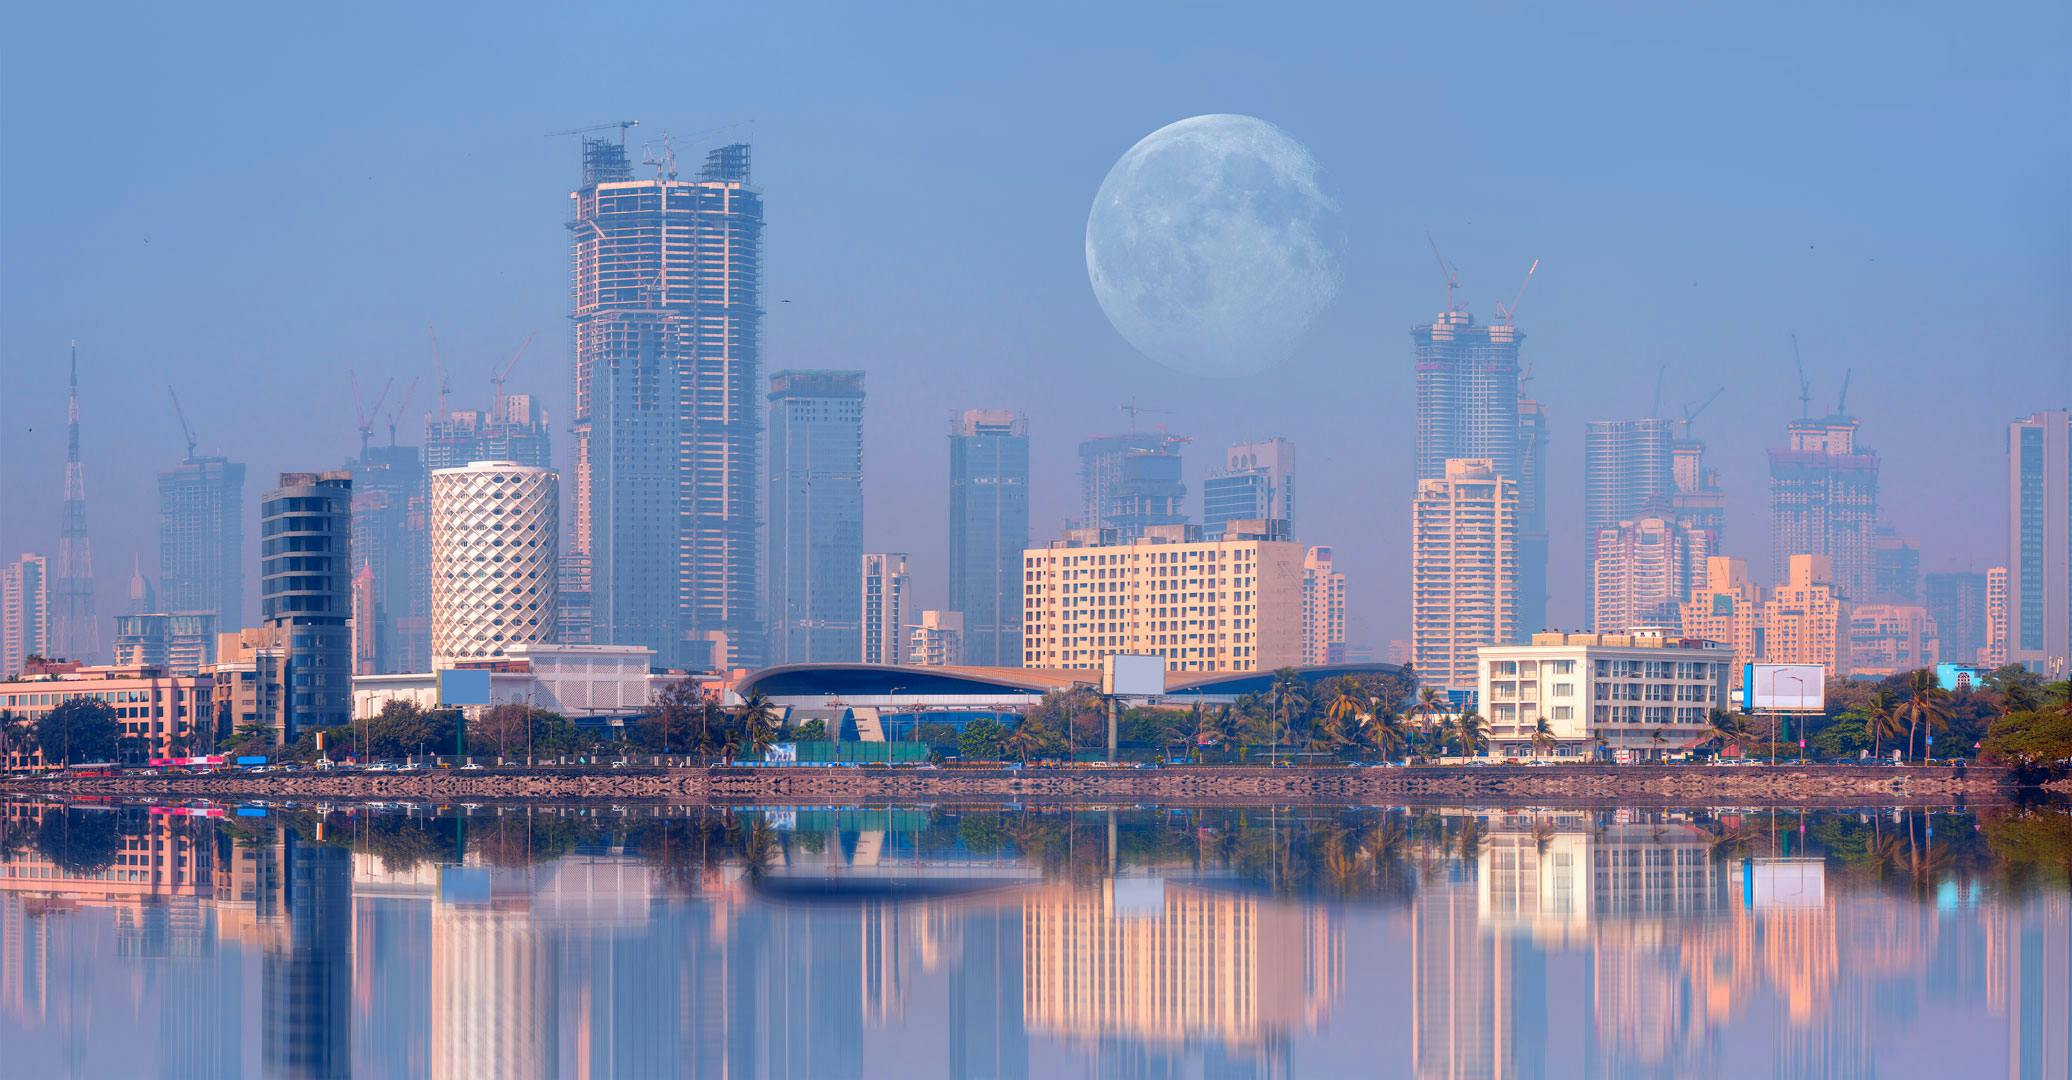 Mumbai cityscape; skyscrapers with cranes on top and the moon in the distance, all reflected on the water